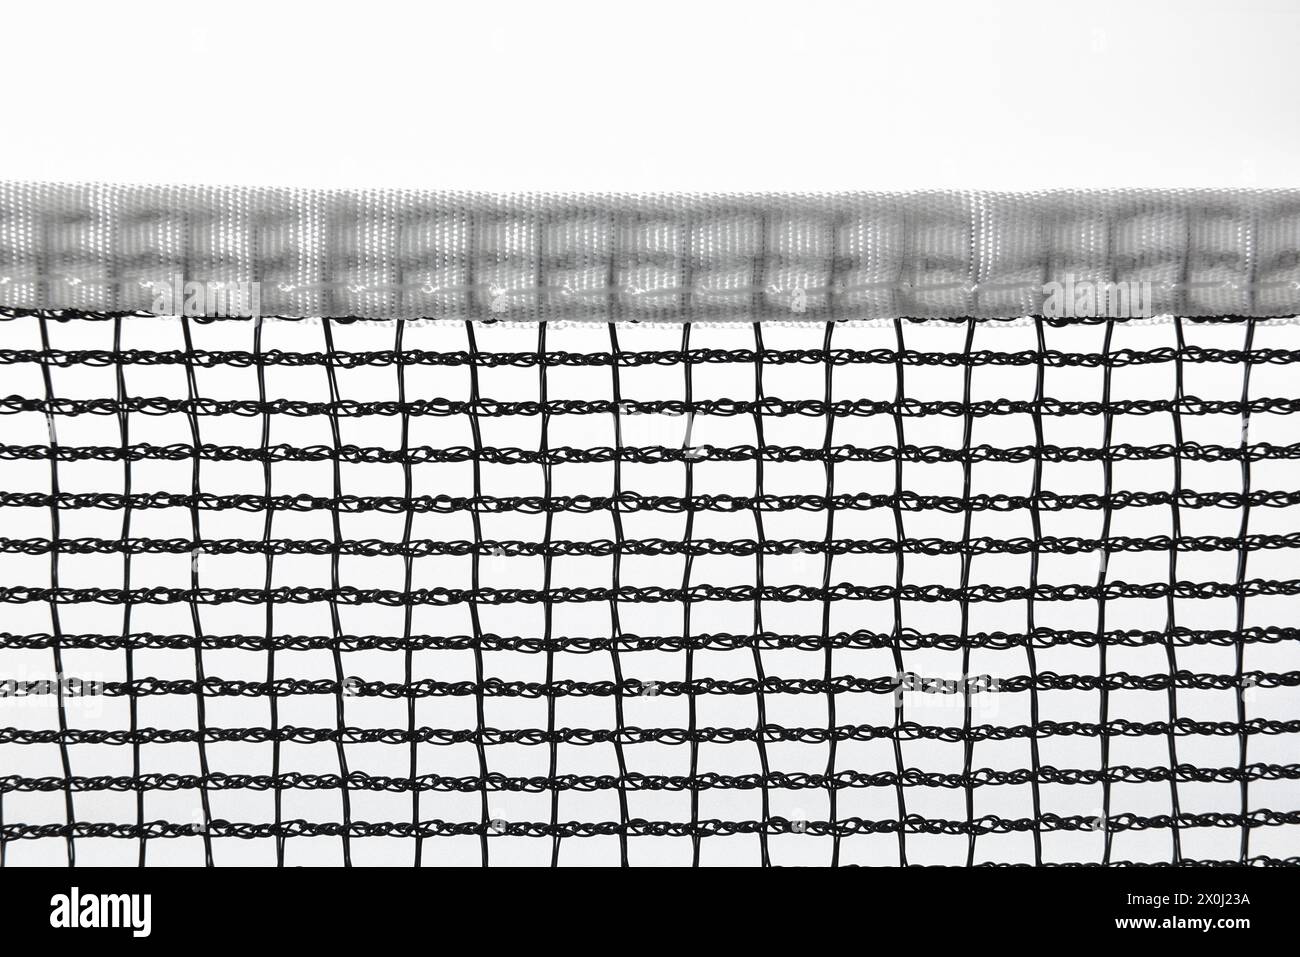 Black sports net with white border for racket and ball games isolated on white background. Stock Photo